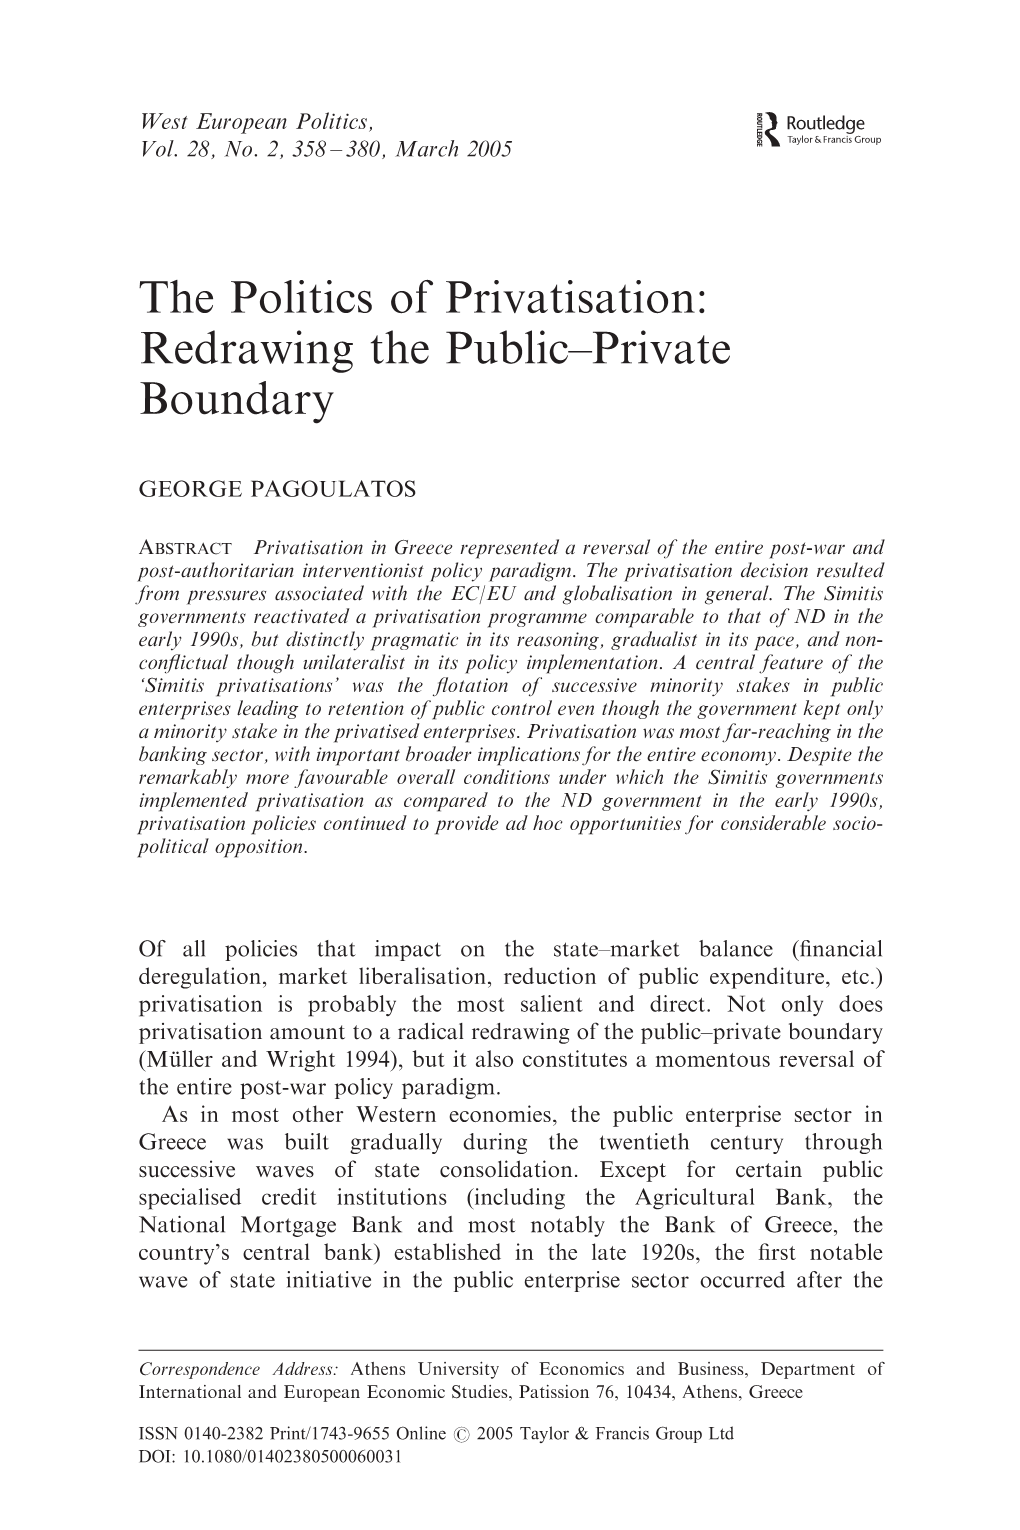 The Politics of Privatisation: Redrawing the Public–Private Boundary